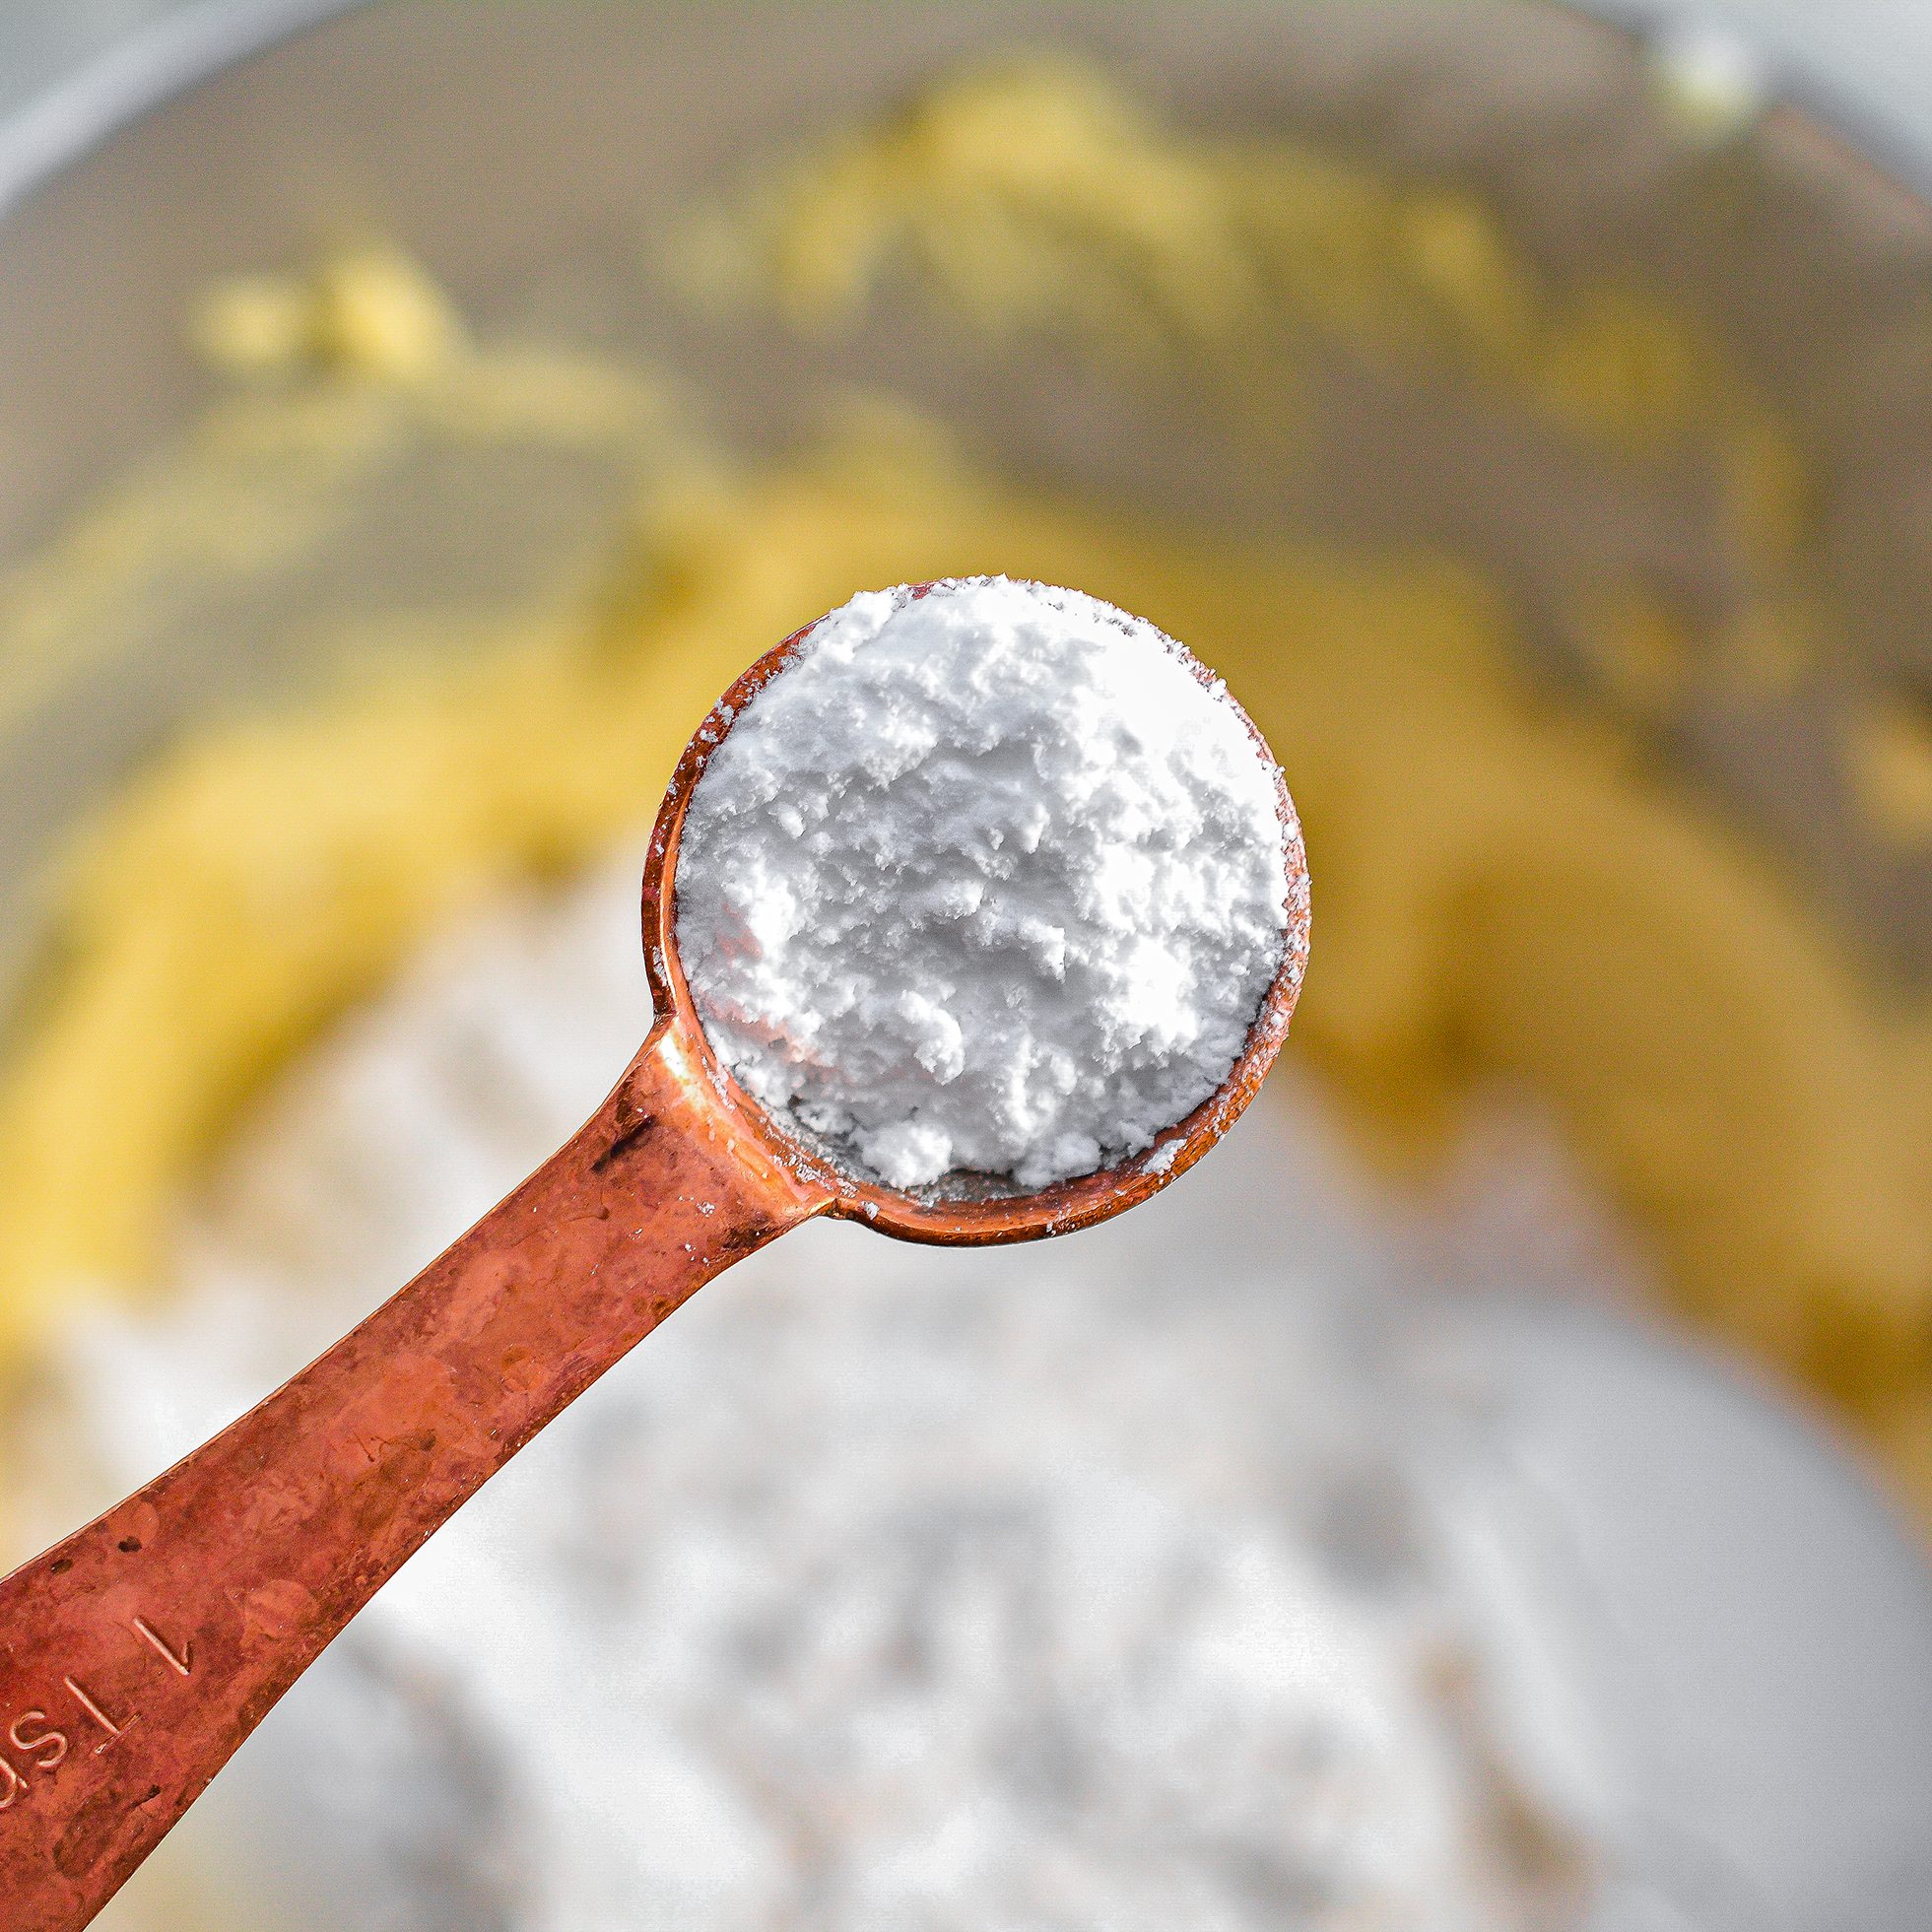 Mix in the flour, baking soda and salt until the mixture is well combined and smooth.